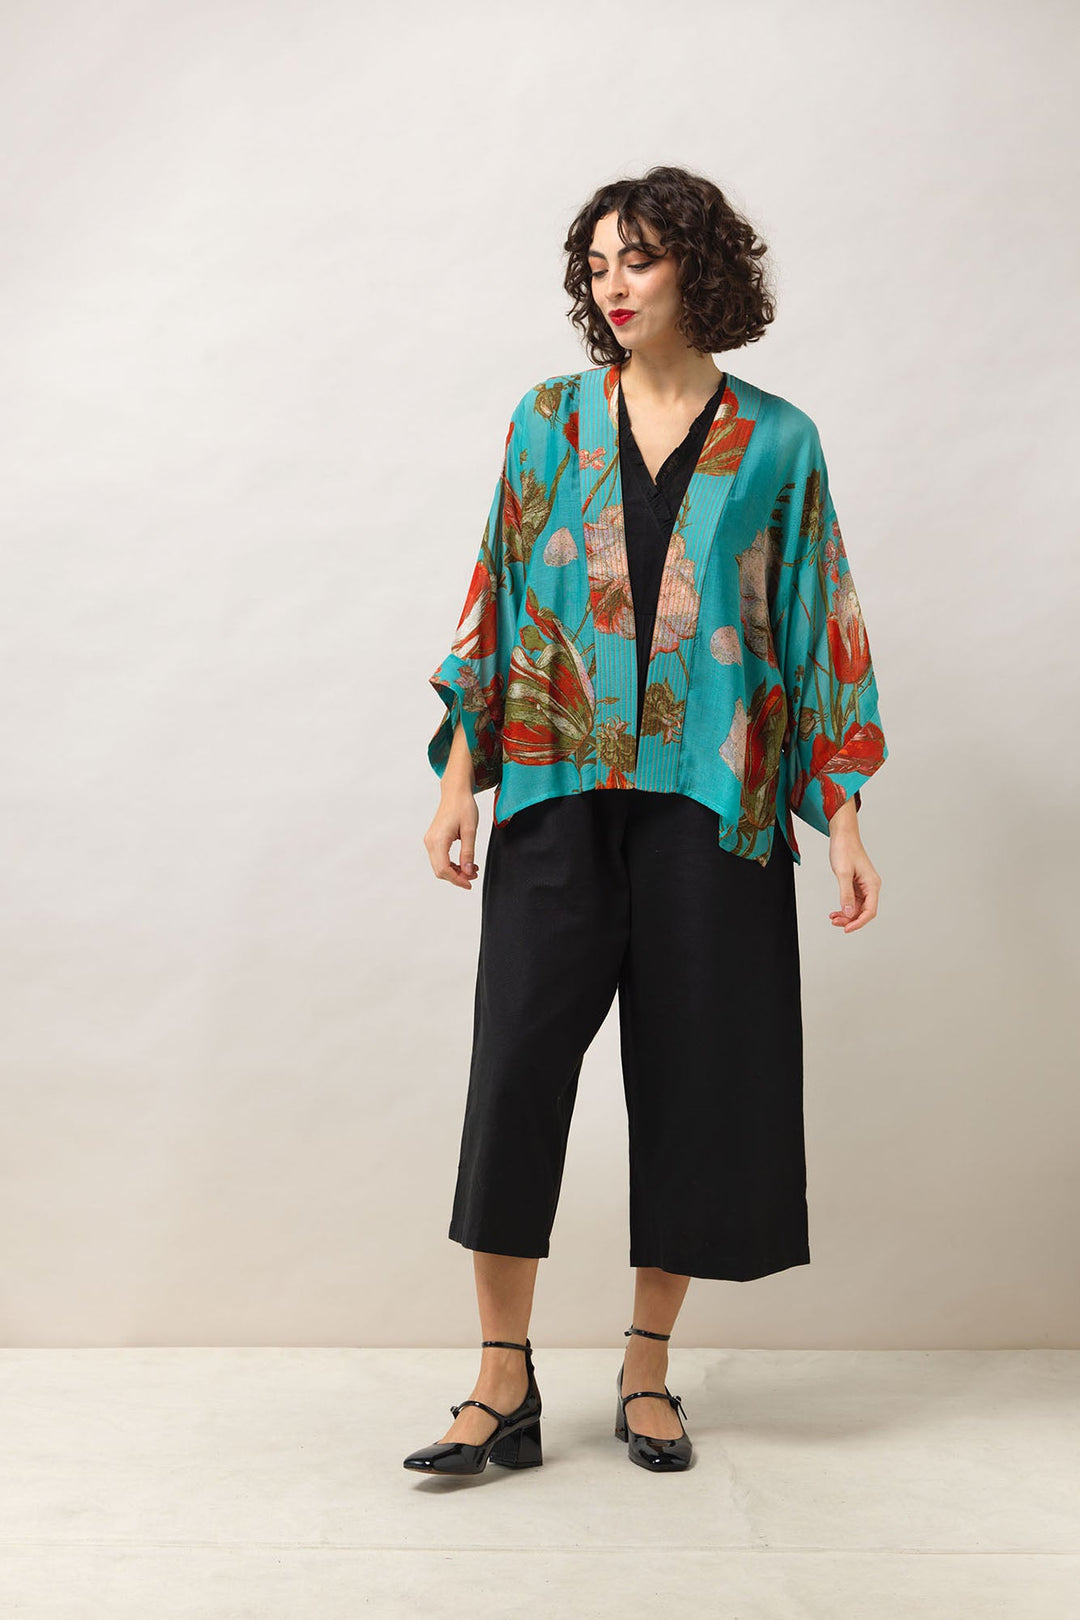 Women's short kimono in blue with tulip floral print by One Hundred Stars